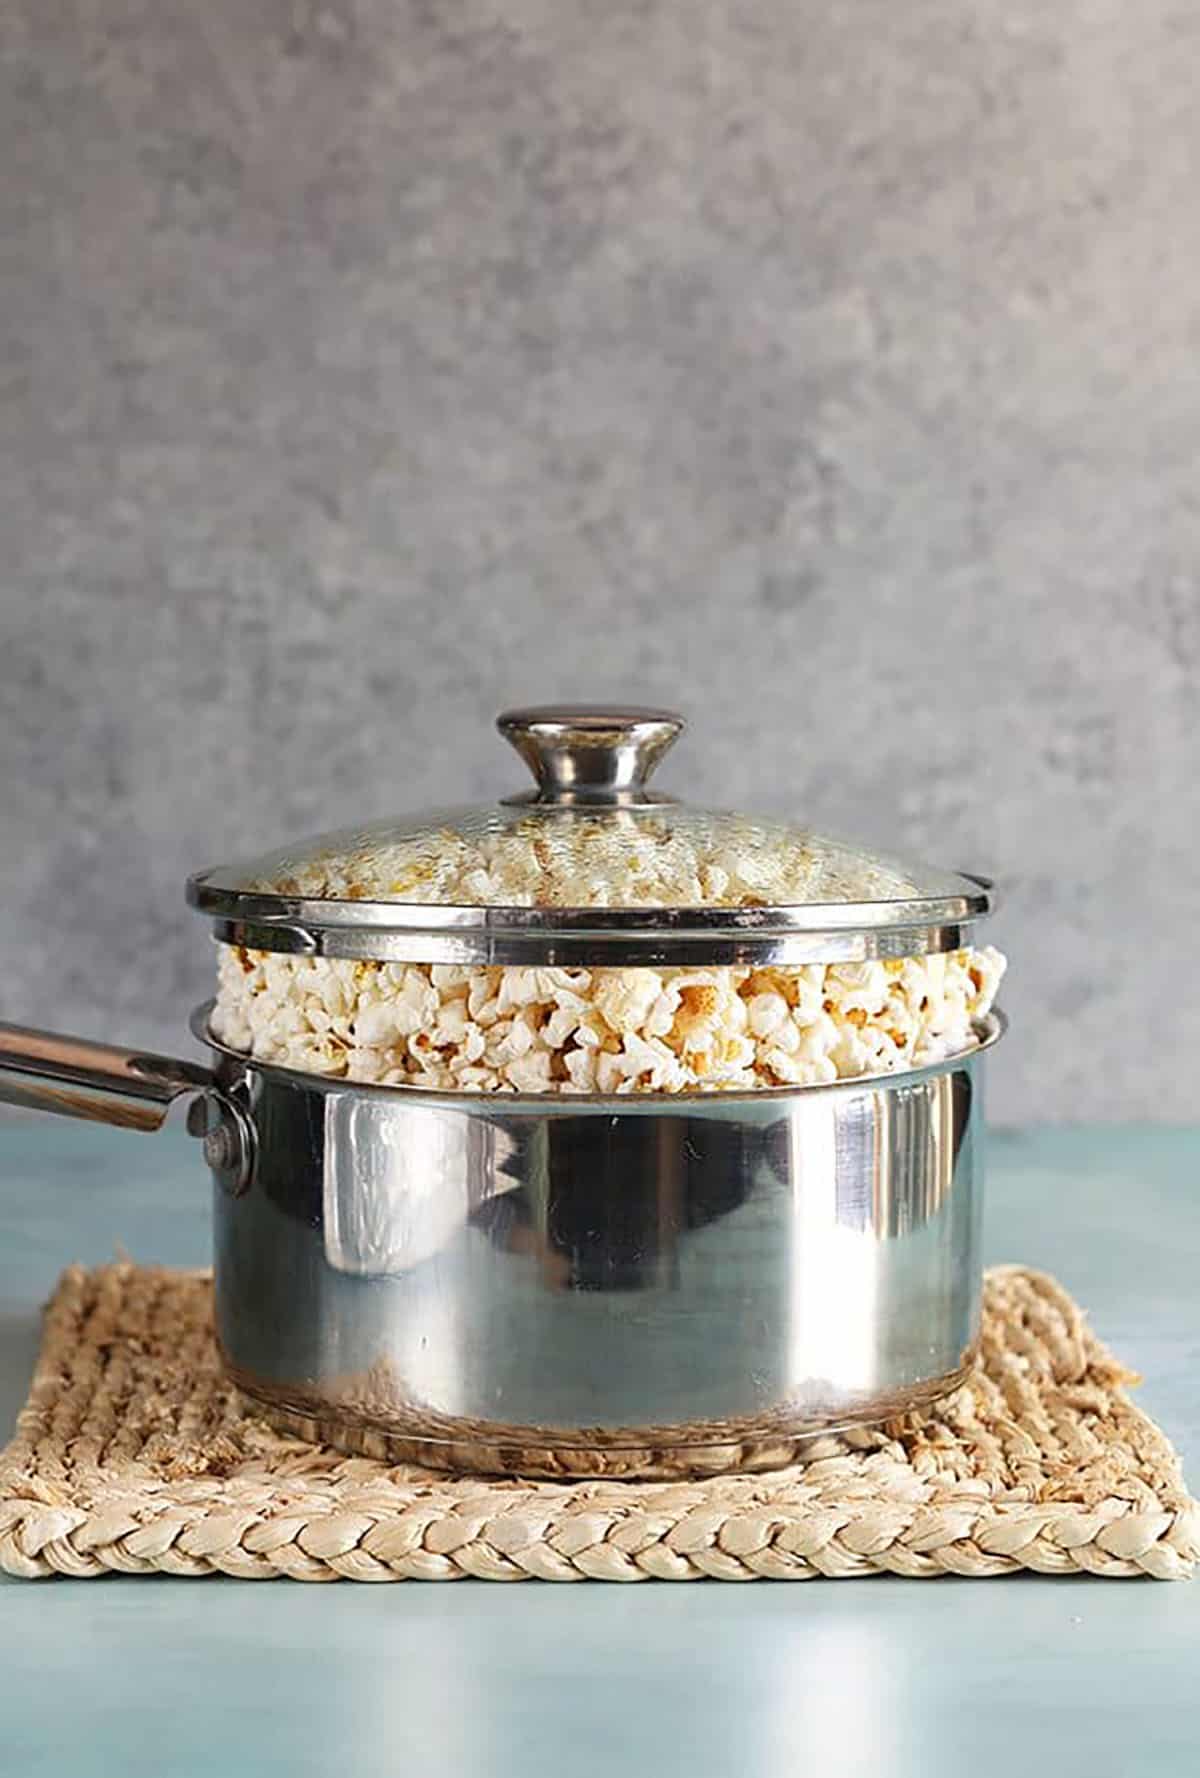 Stovetop popcorn in a stainless steel pot with a glass lid.